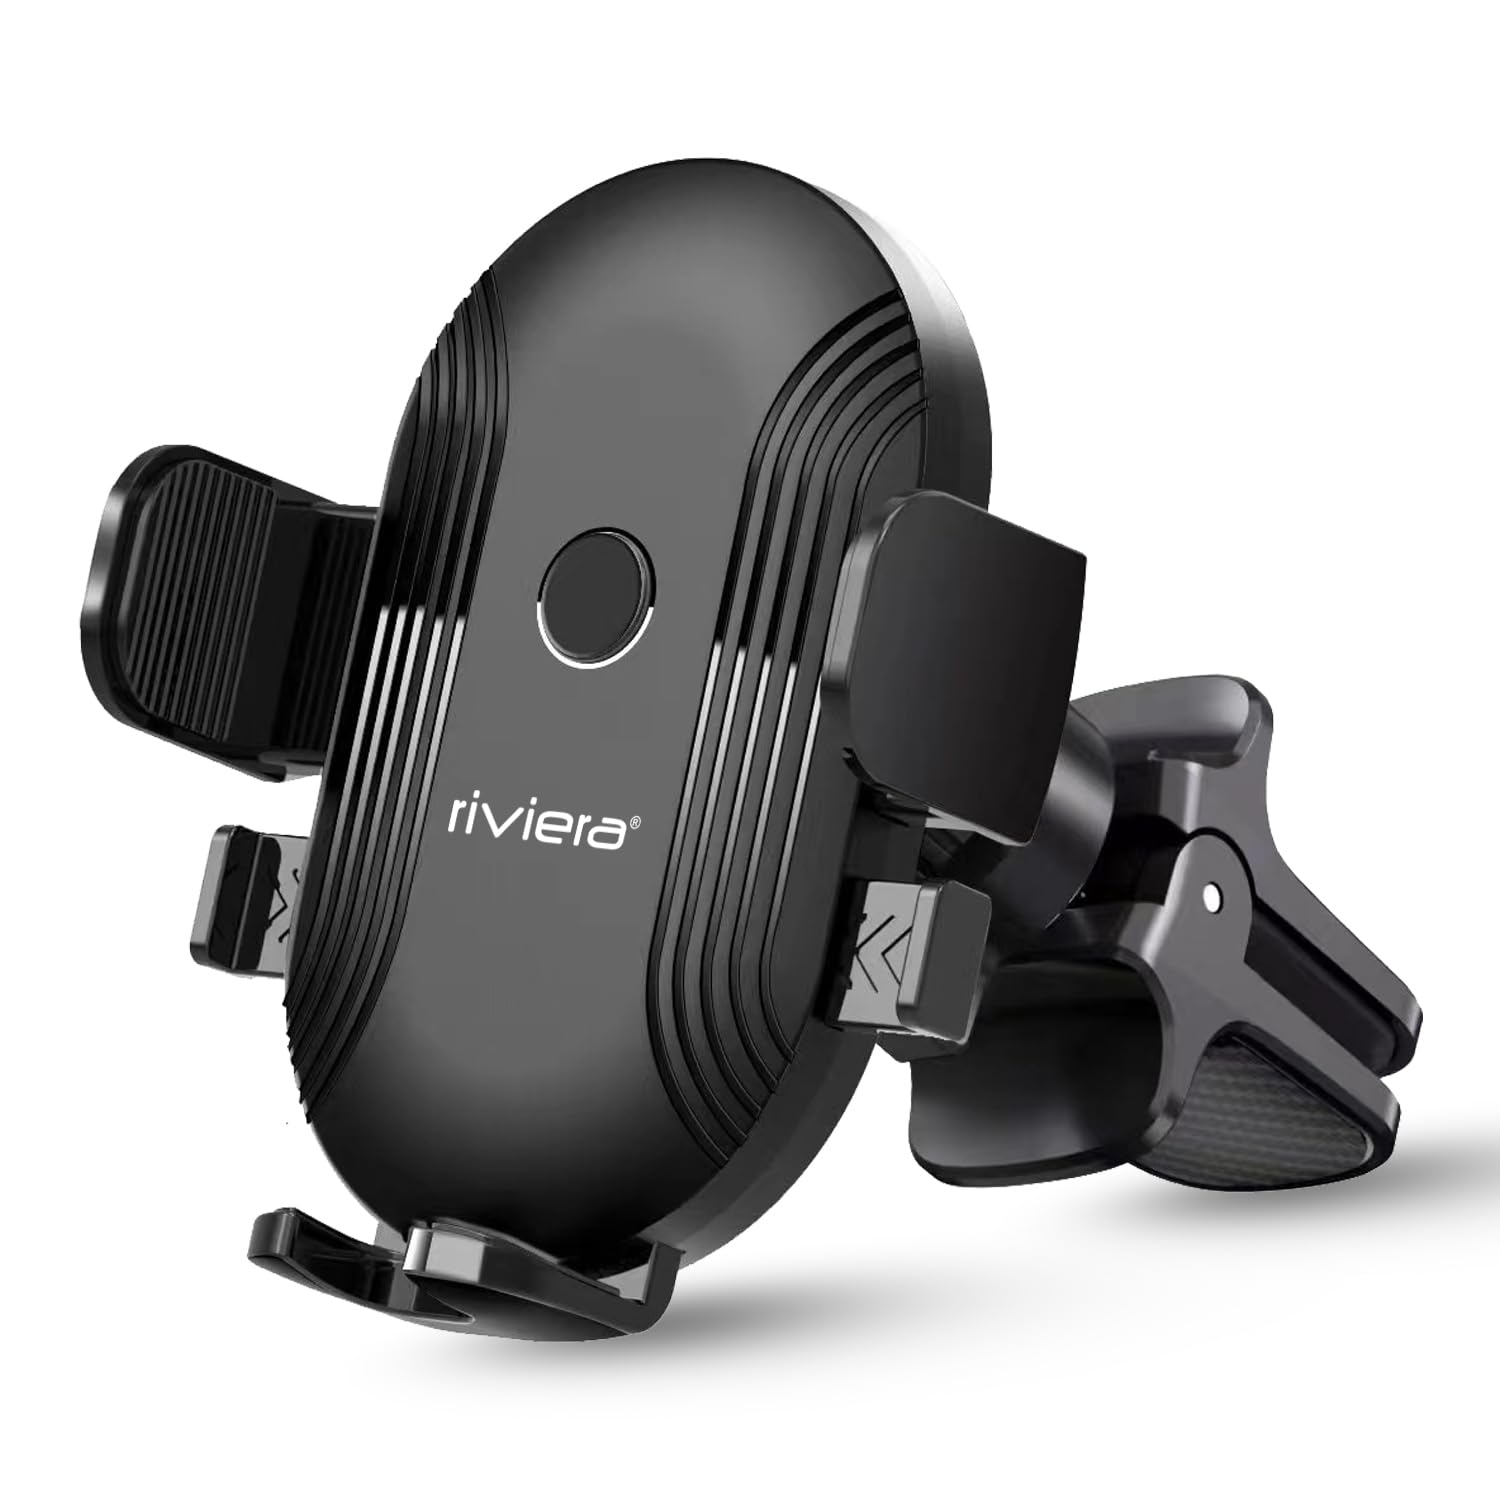 Riviera RMS04 Mobile Holder 360° Rotational for Car AC Vent, Strong Grip & Material, Easy Set Up Compatible All Smartphones(Black)